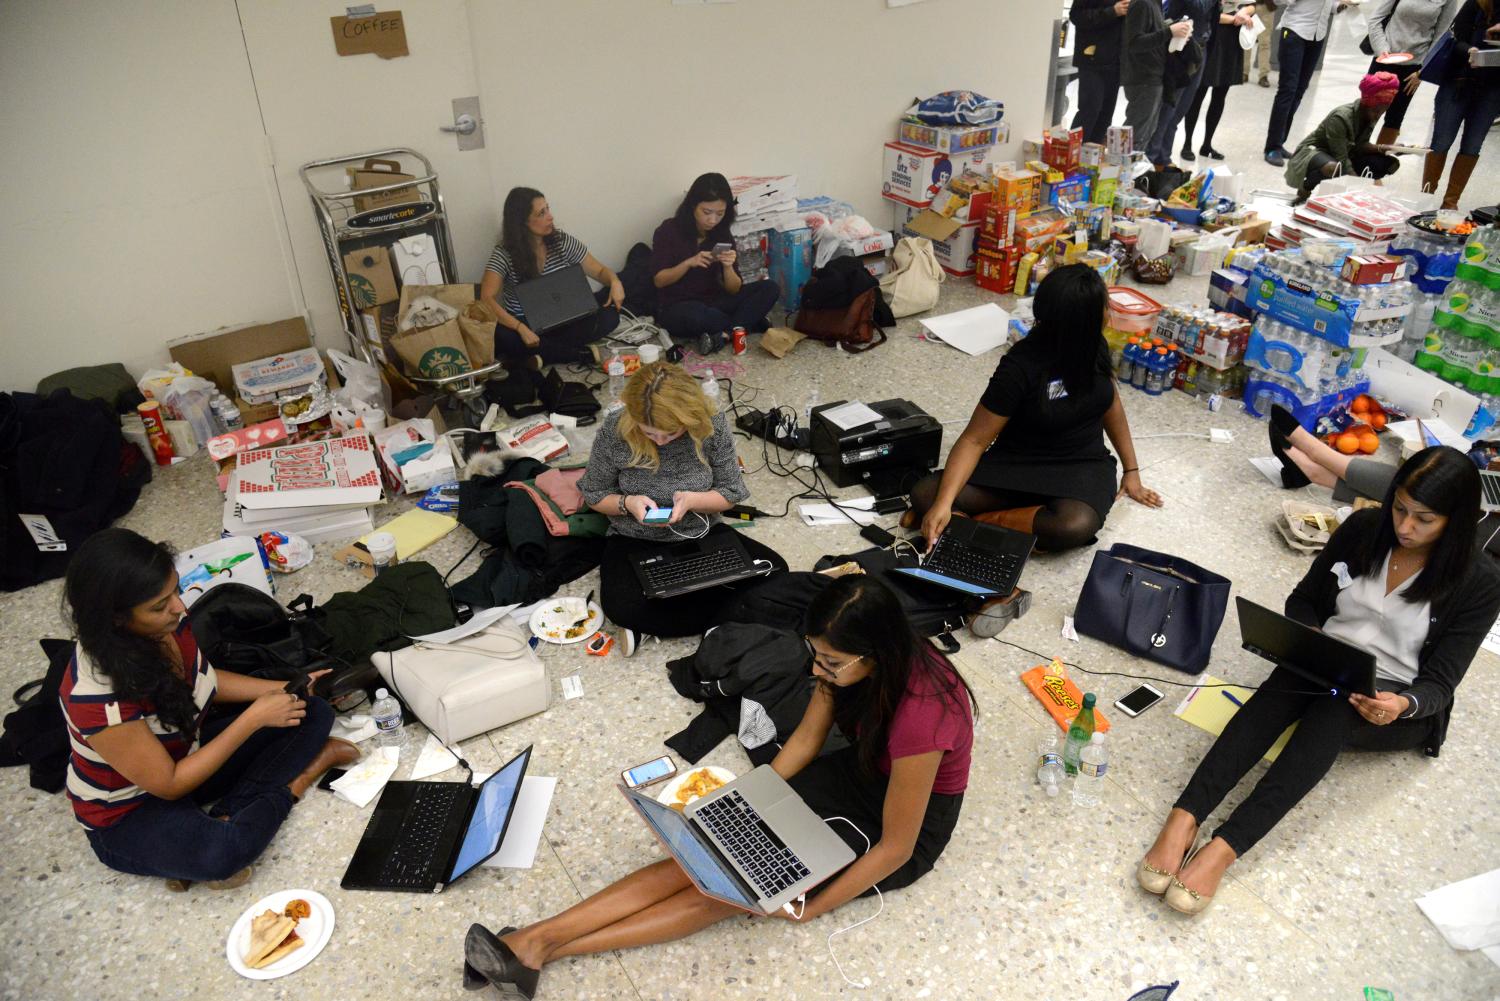 Lawyers and legal assistants network and use social media in the baggage claim area, amid supplies of pizza, water and other food, at Dulles International Airport, aiding passengers who have arrived and encounter problems because of Donald Trump's travel ban to the United States, in Chantilly, Virginia, in suburban Washington, U.S., January 29, 2017. REUTERS/Mike Theiler - RTSXZ6R